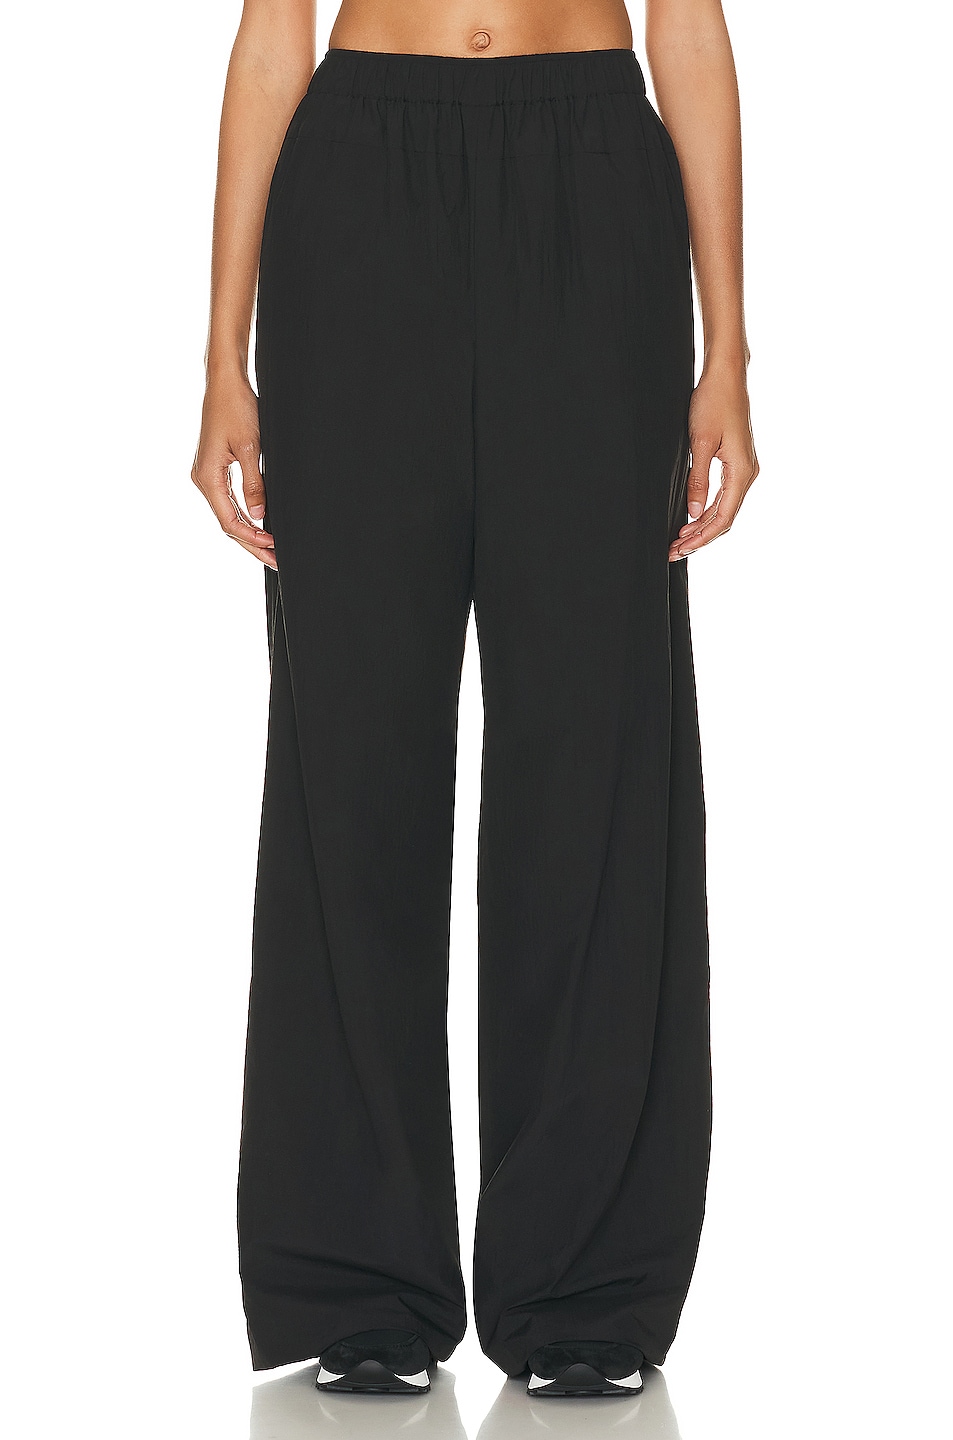 Image 1 of The Row Galante Pant in Black